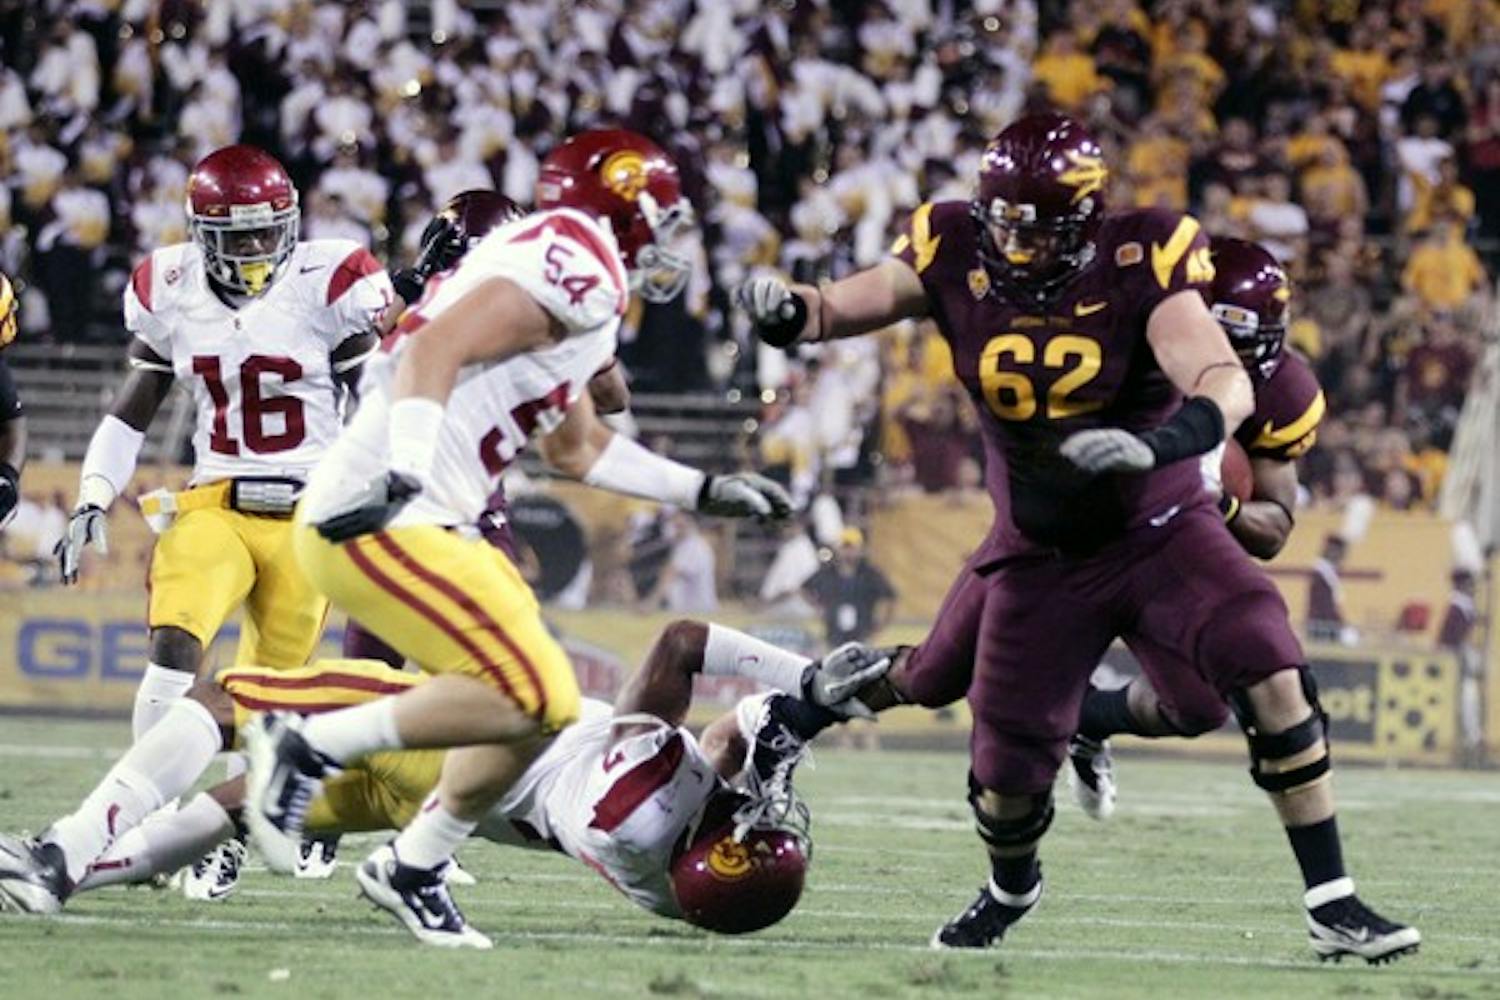 ALMOST THERE: ASU sophomore offensive lineman Evan Finkenberg runs to make a block for sophomore wide receiver Kyle Middlebrooks during the Sun Devils’ win over USC in September. If Finkenberg is healthy on Saturday, then the Sun Devils’ offensive line will be intact for the first time all season. (Photo by Beth Easterbrook)